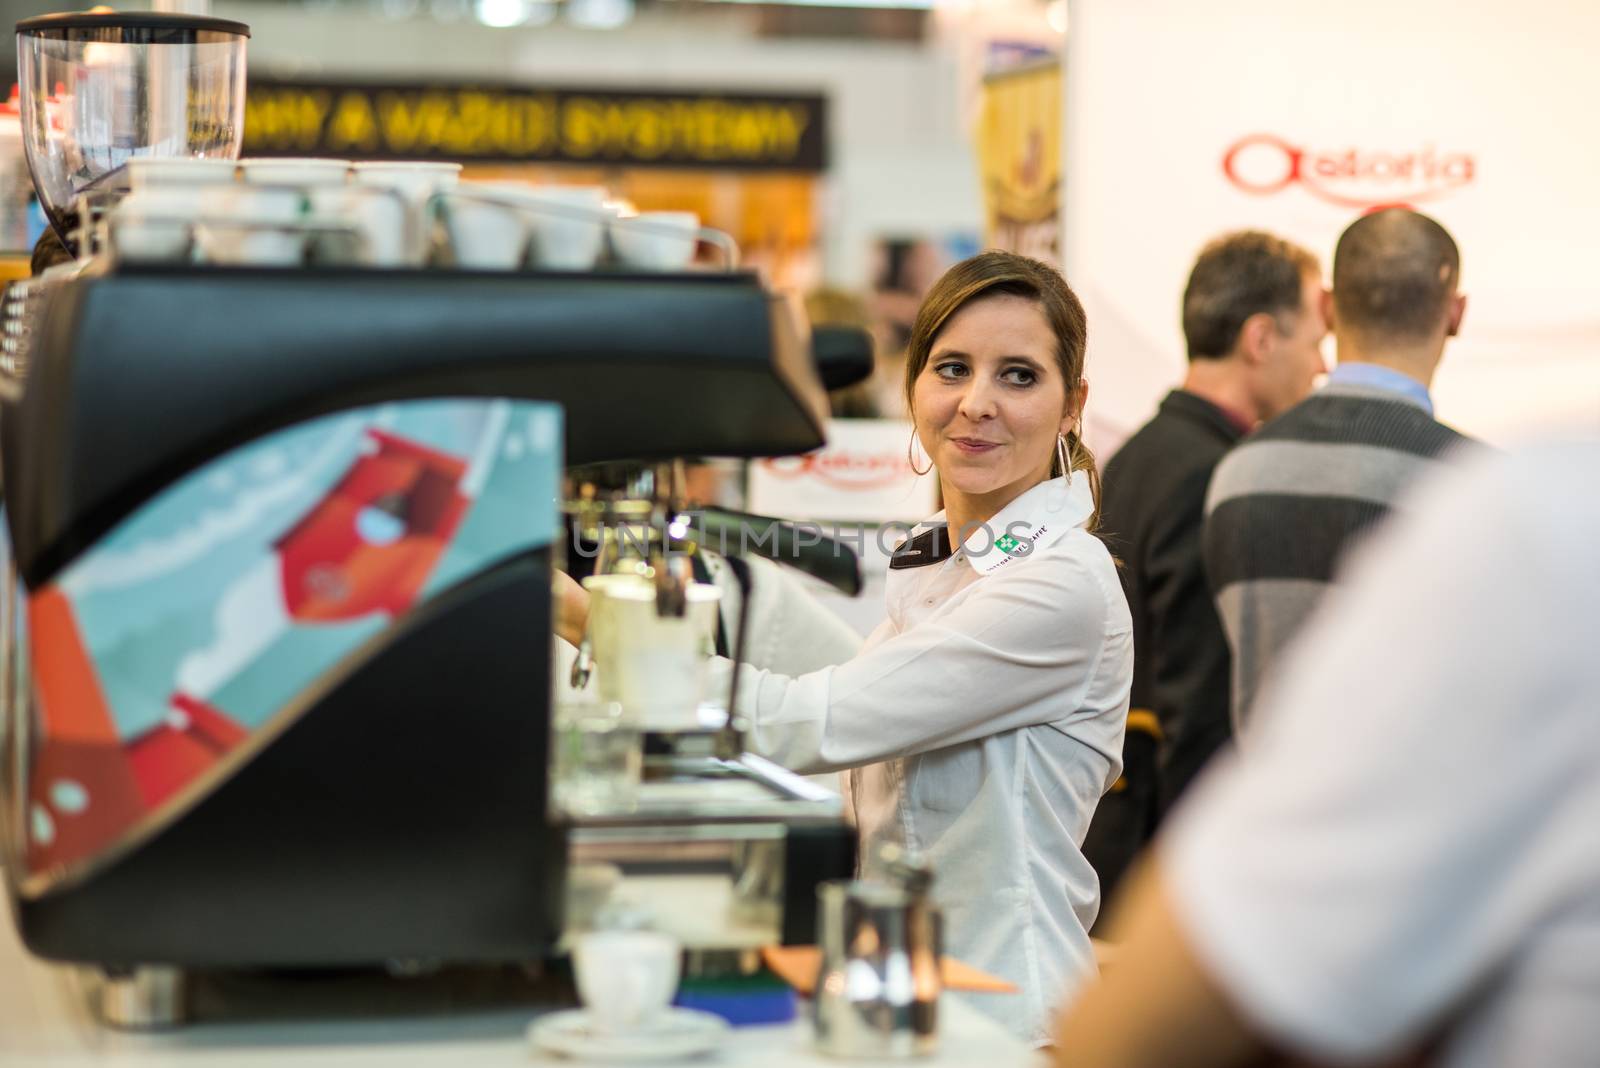 Woman in charge of preparing is preparing coffee to the guest attending an event at the convention trade center in Brno. BVV Brno Exhibition center. Czech Republic